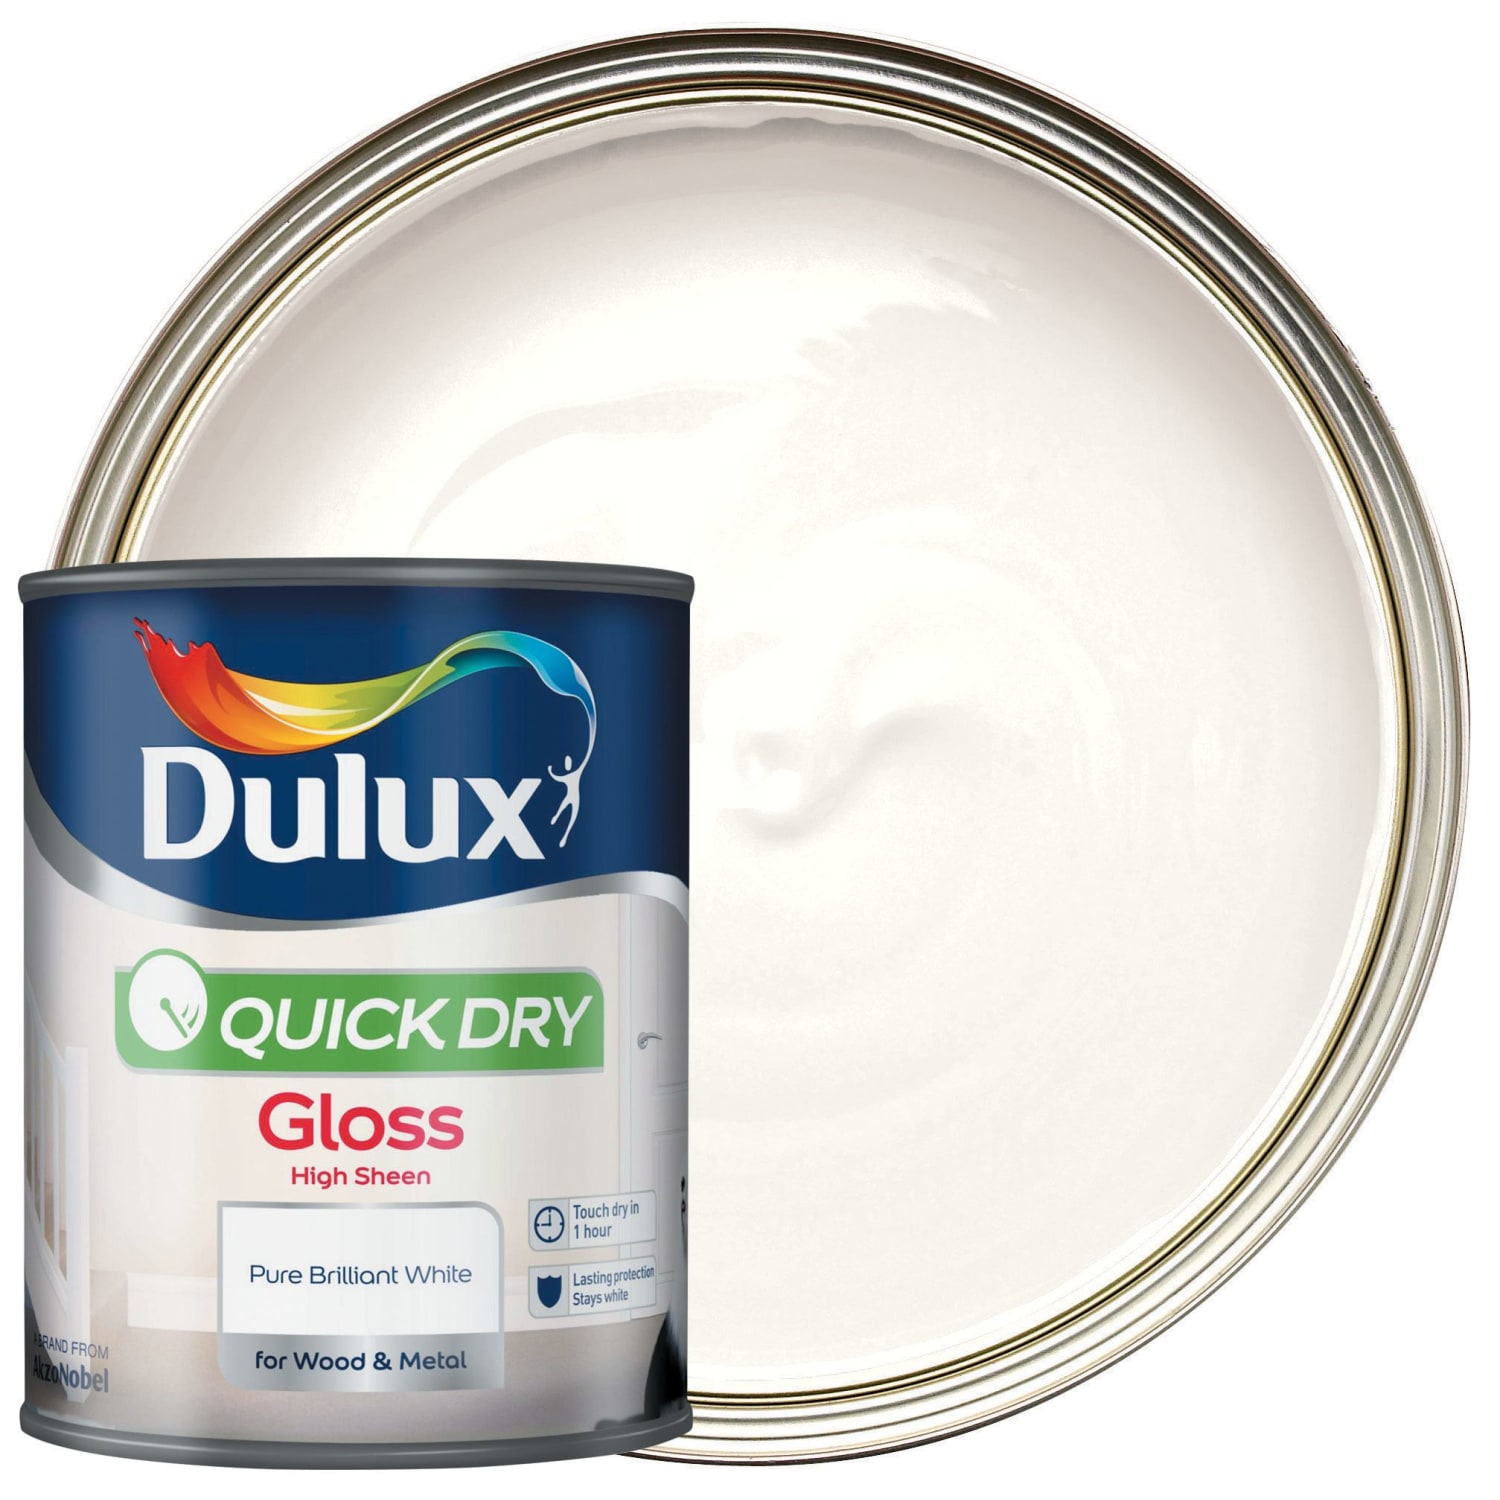 Dulux - Interior Fast-Dry Oil-Based Wood Stain